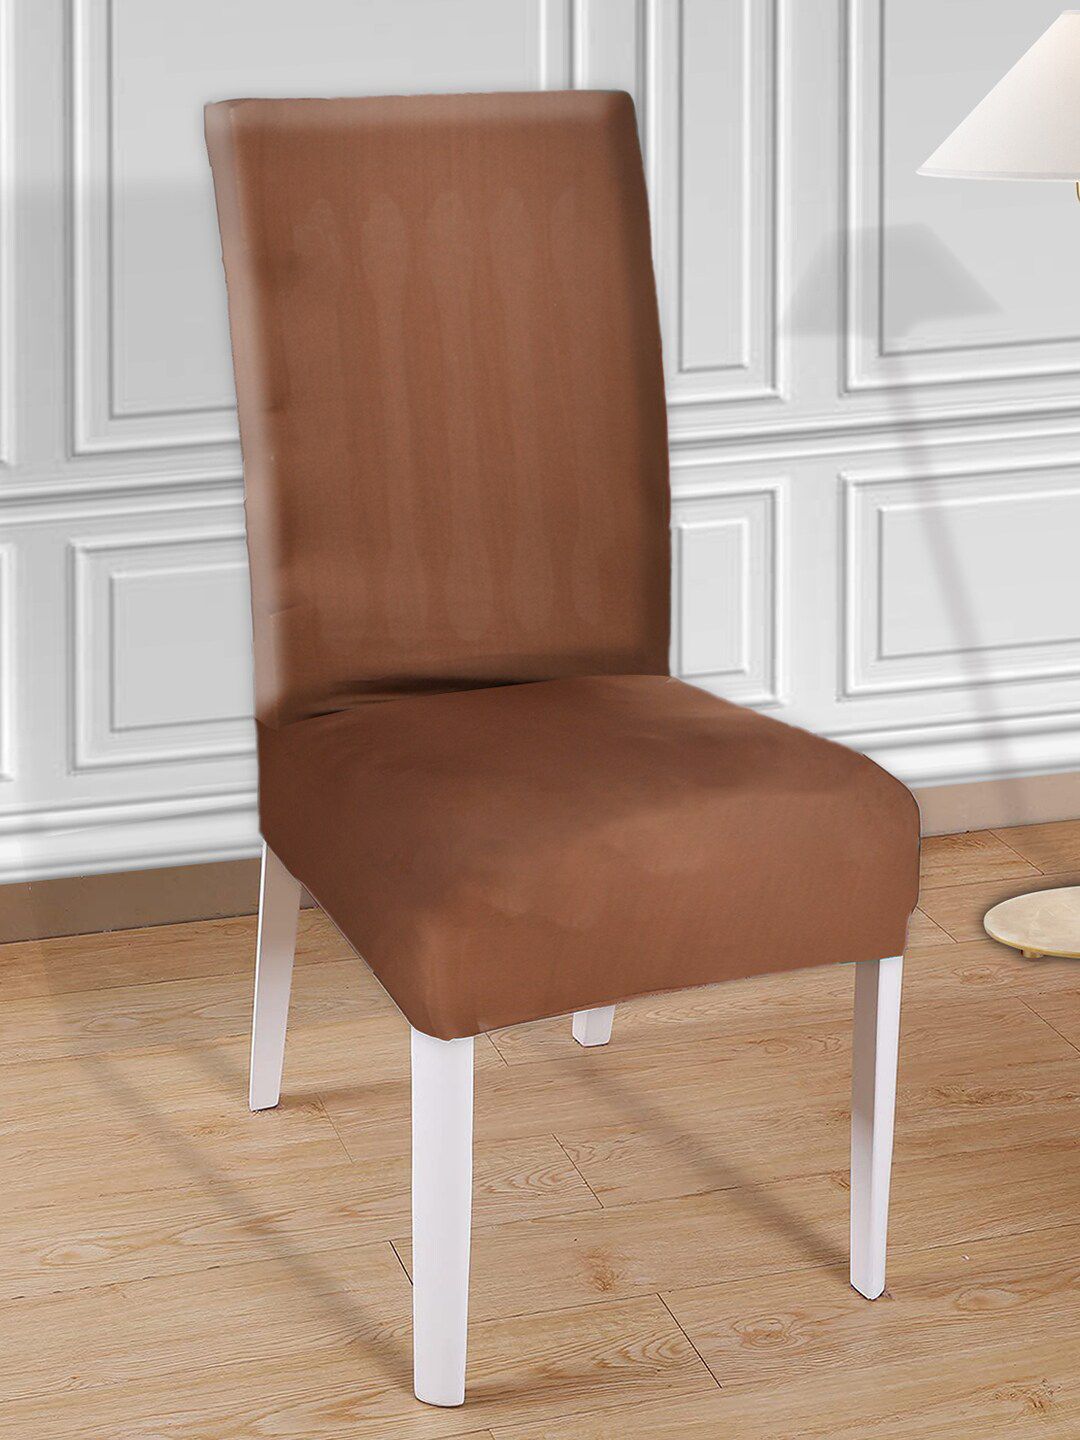 Kuber Industries Set Of 4 Bown Solid Elastic Stretchable Chair Cover Price in India